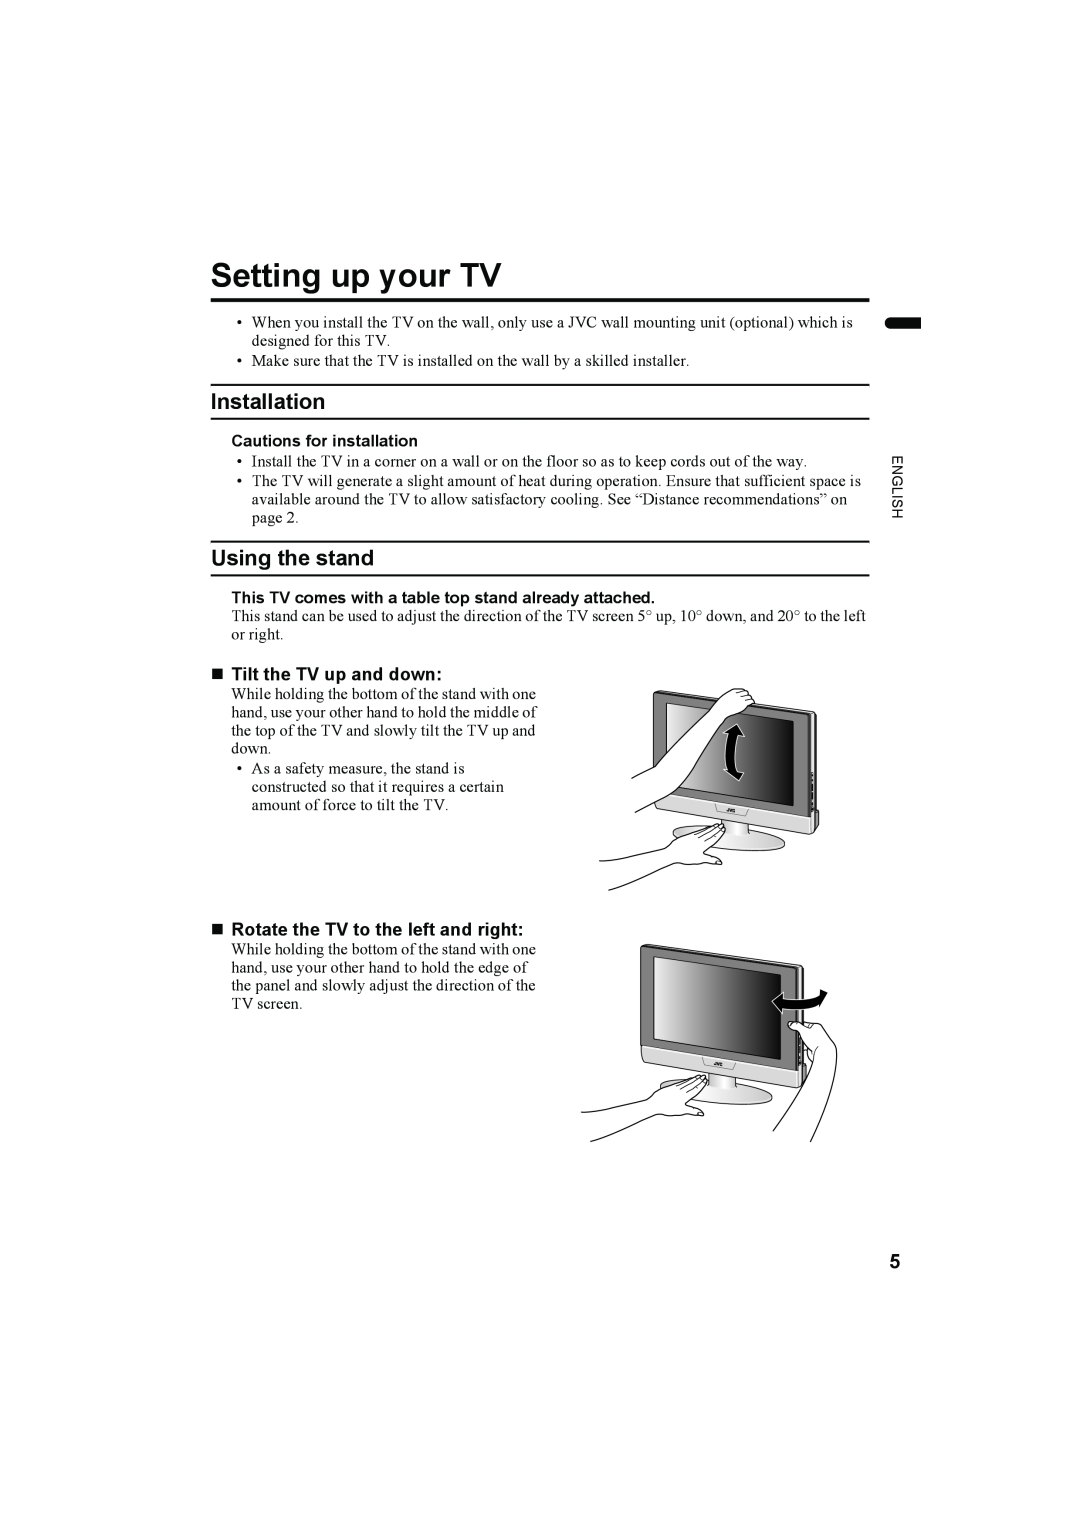 JVC LT-Z32SX4B Setting up your TV, Installation, Using the stand, „ Tilt the TV up and down, Cautions for installation 